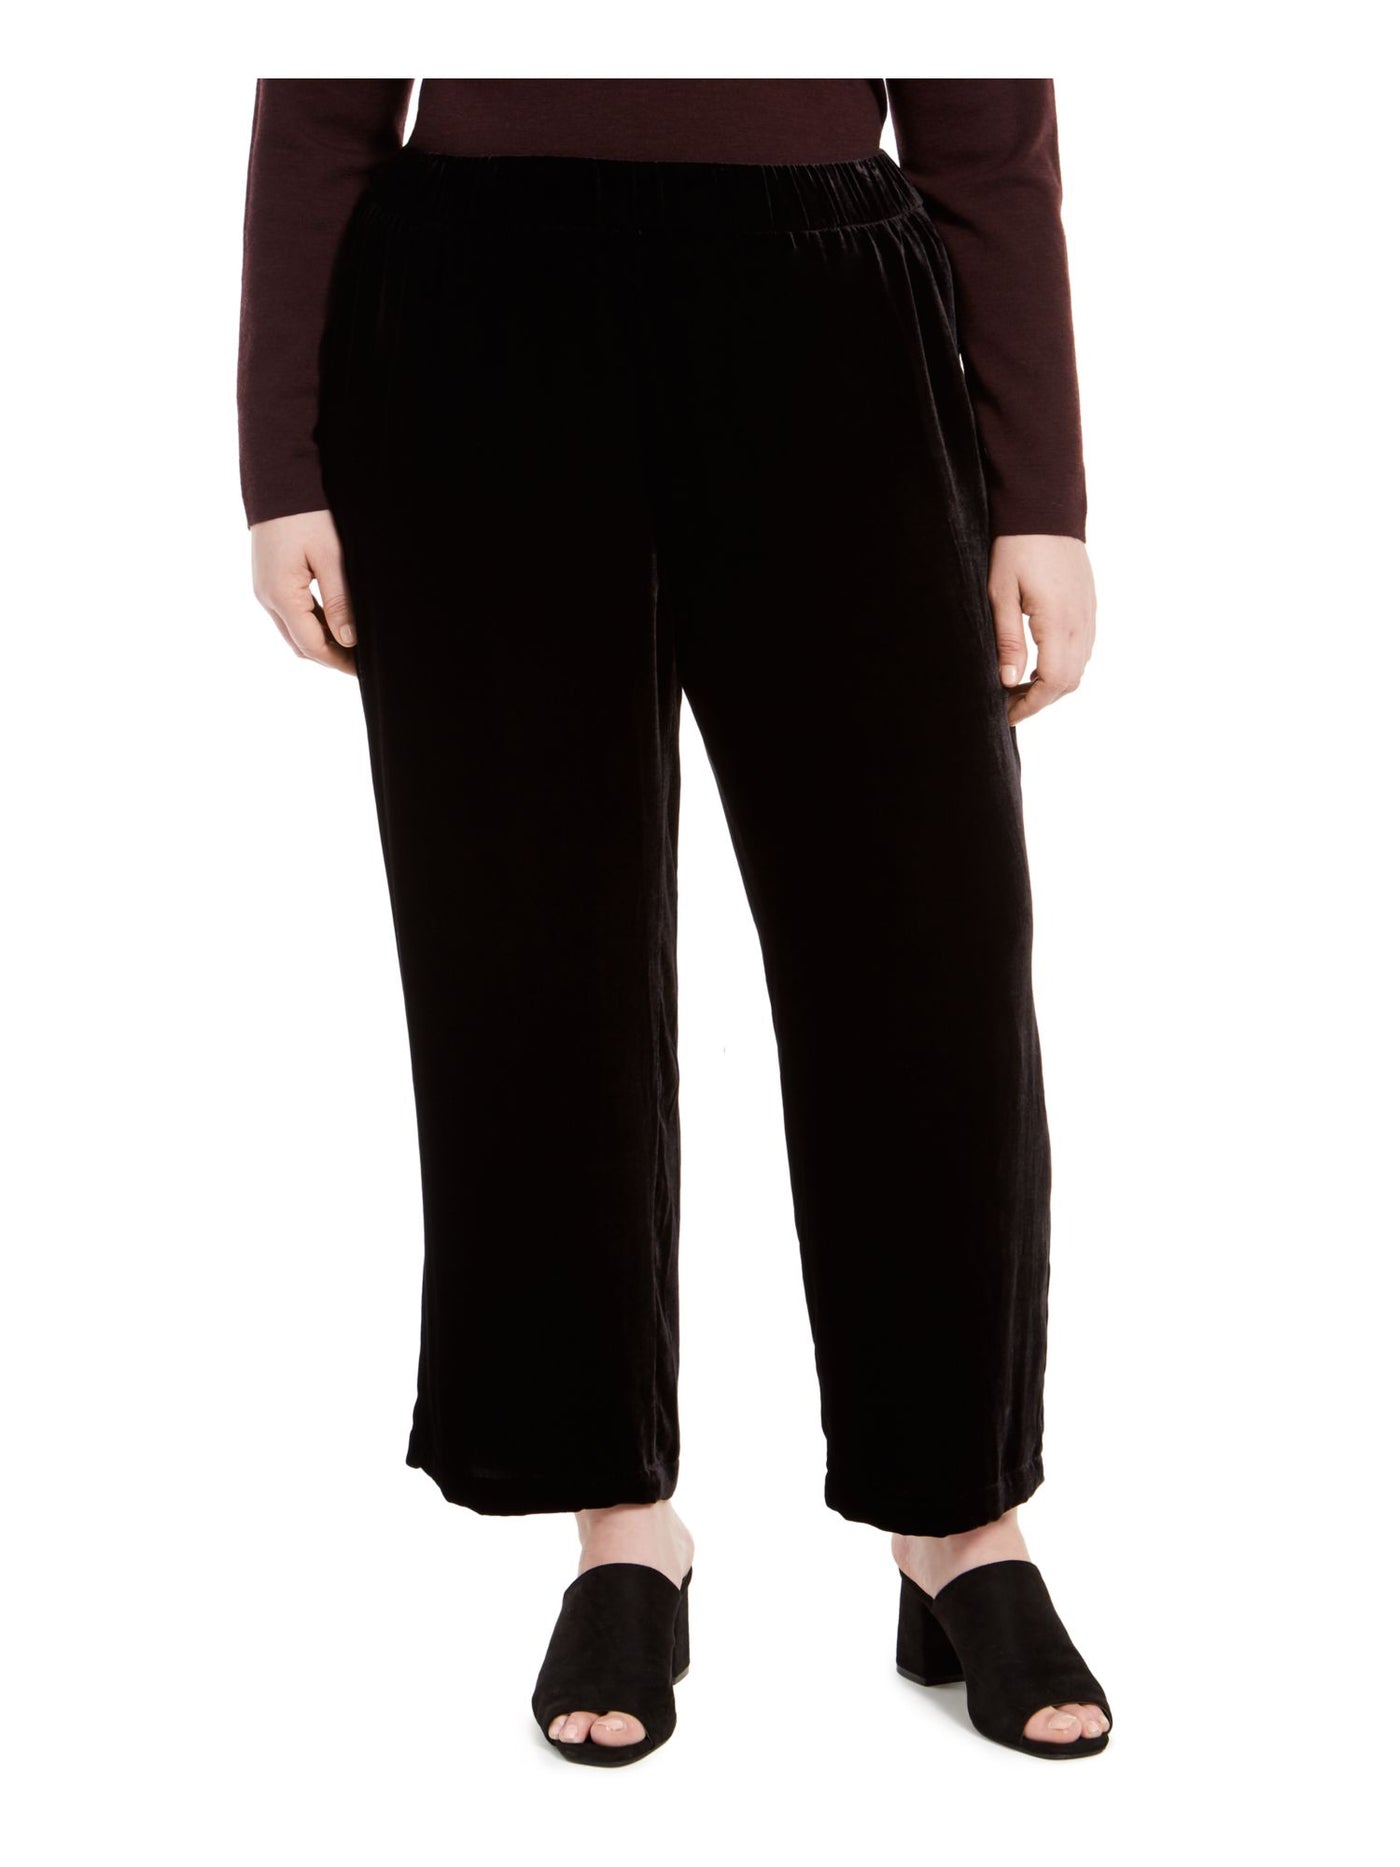 EILEEN FISHER Womens Black Evening Cropped Pants Plus 2X